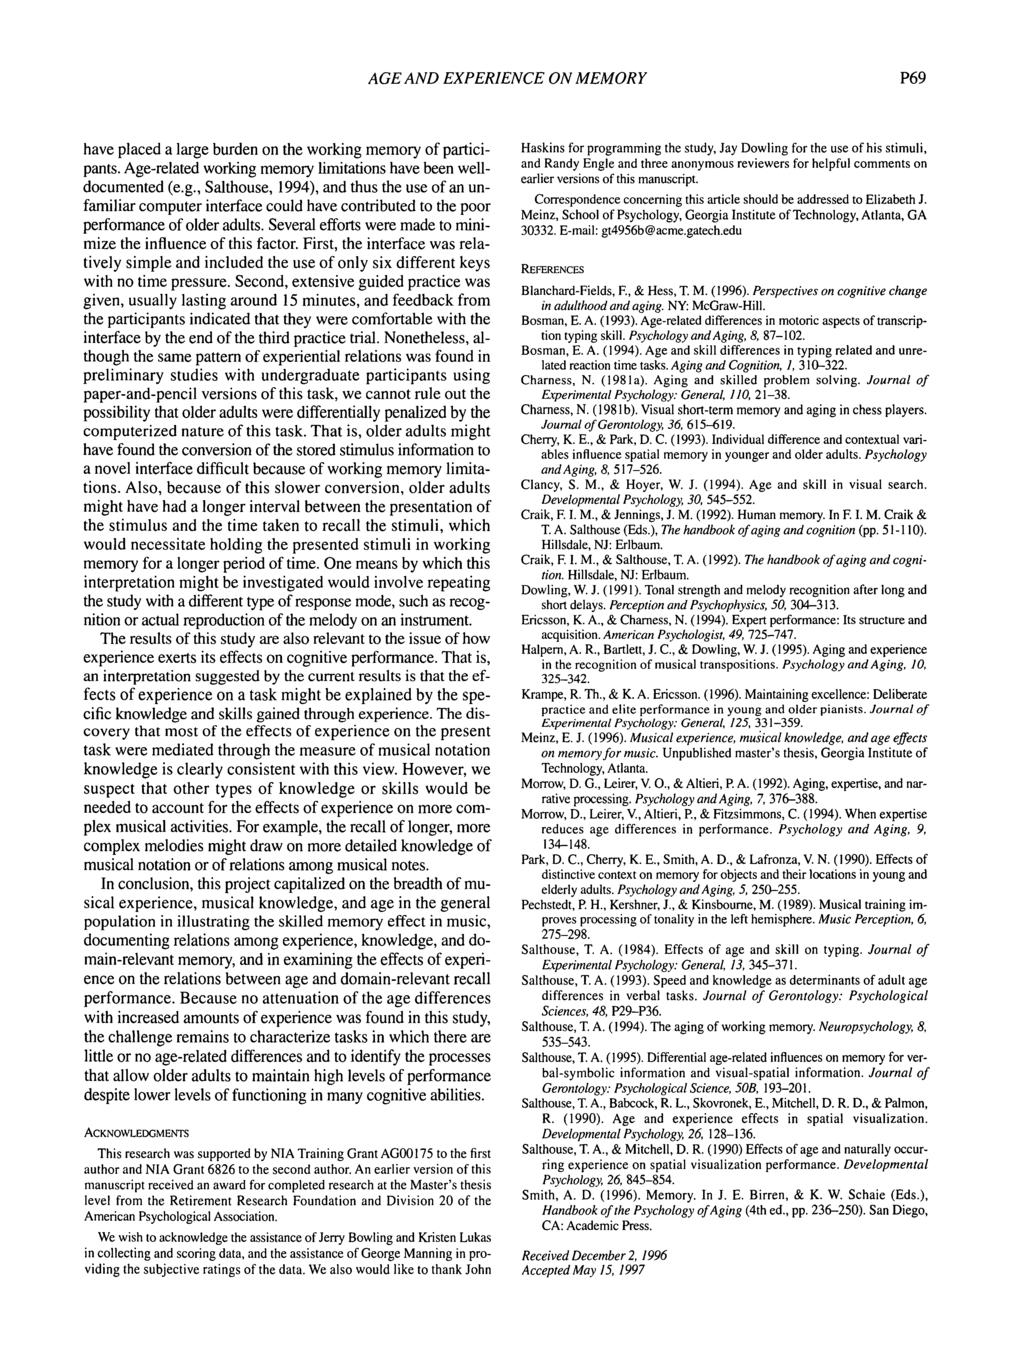 AGE AND EXPERIENCE ON EORY P69 have placed a large burden on the working memory of participants. Age-related working memory limitations have been welldocumented (e.g., Salthouse, 1994), and thus the use of an unfamiliar computer interface could have contributed to the poor performance of older adults.